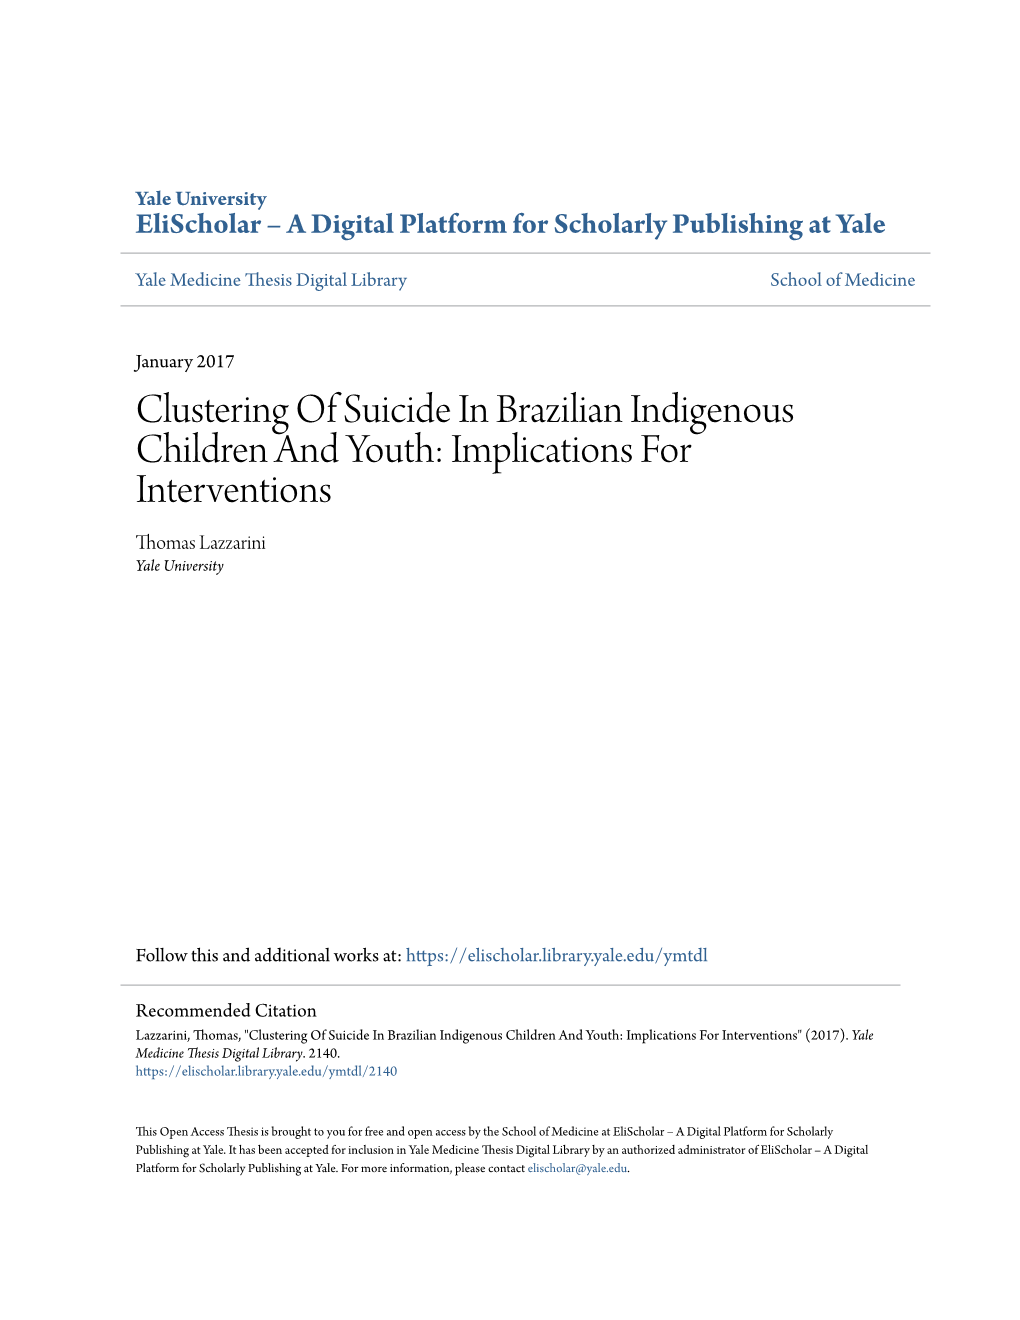 Clustering of Suicide in Brazilian Indigenous Children and Youth: Implications for Interventions Thomas Lazzarini Yale University